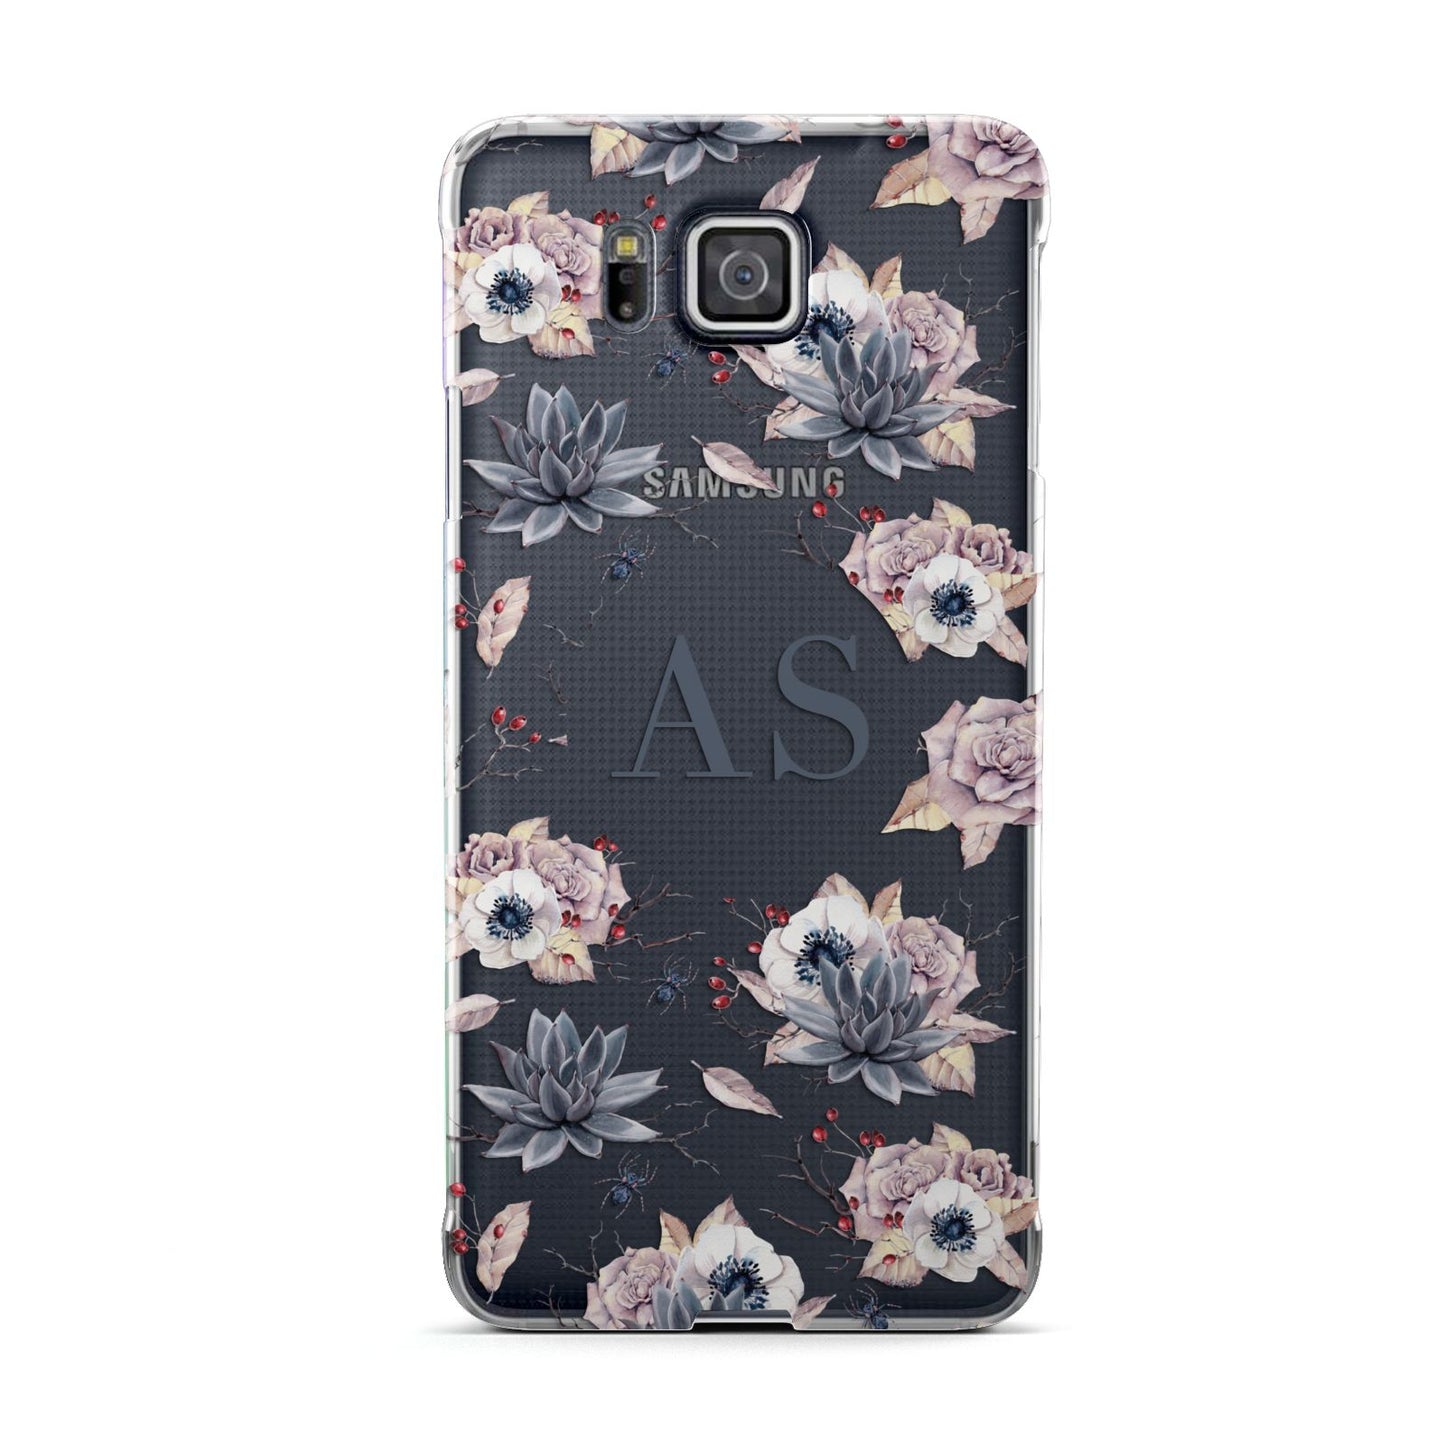 Personalised Halloween Floral Samsung Galaxy Alpha Case